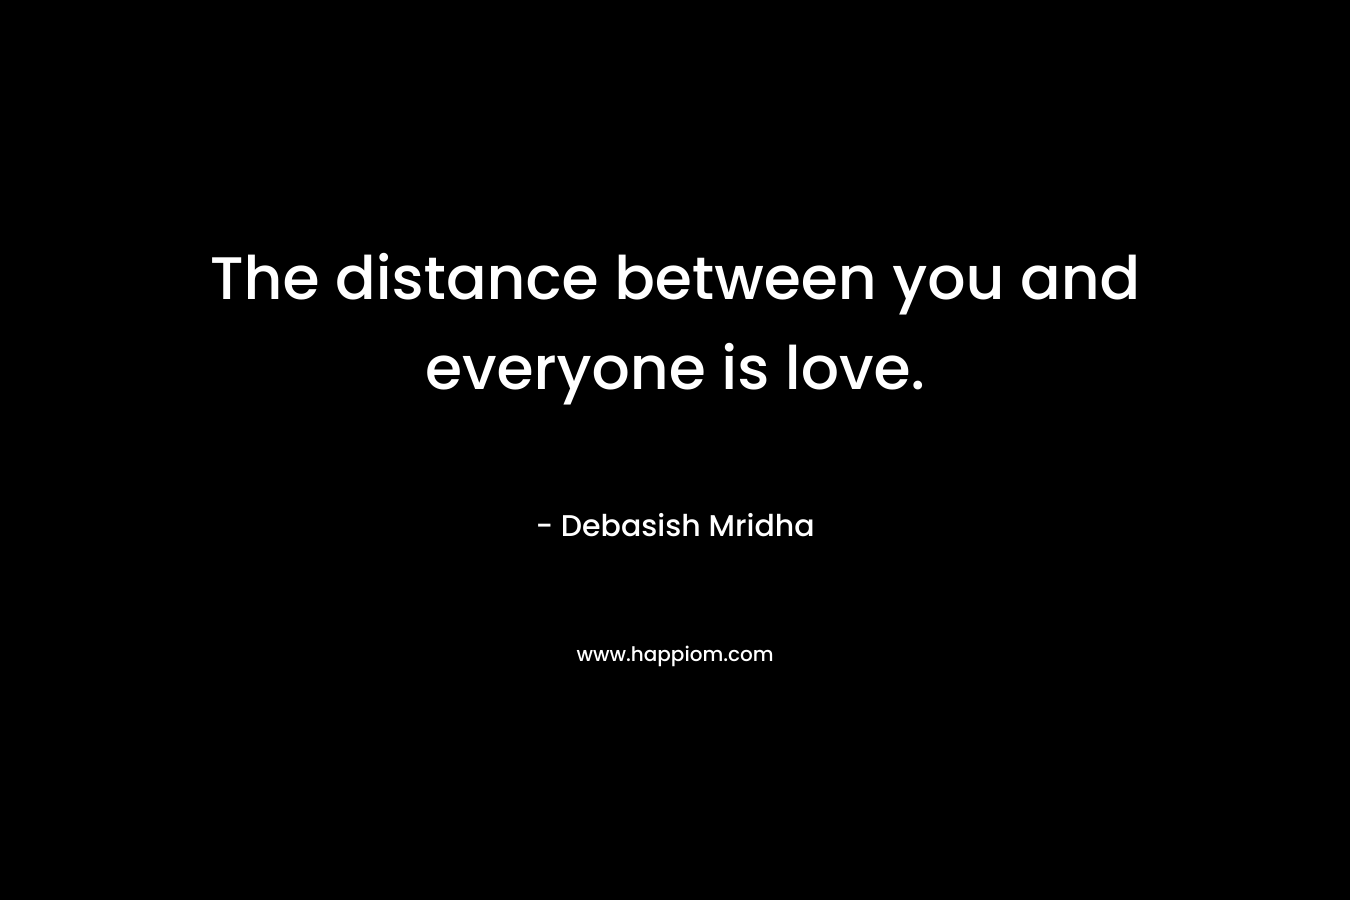 The distance between you and everyone is love.